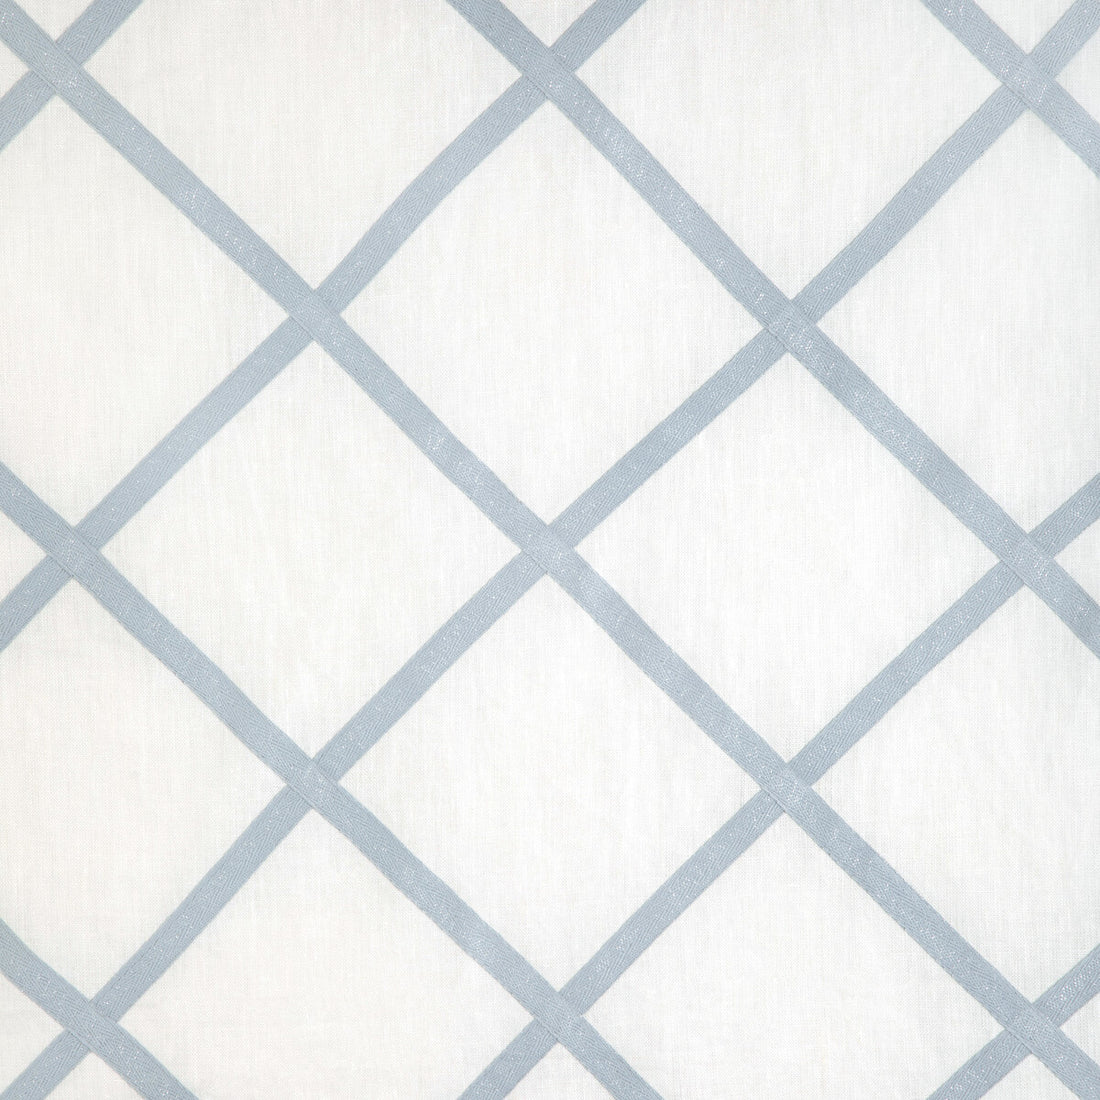 Crisscross Luxe fabric in seamist color - pattern 36806.5.0 - by Kravet Design in the Candice Olson collection